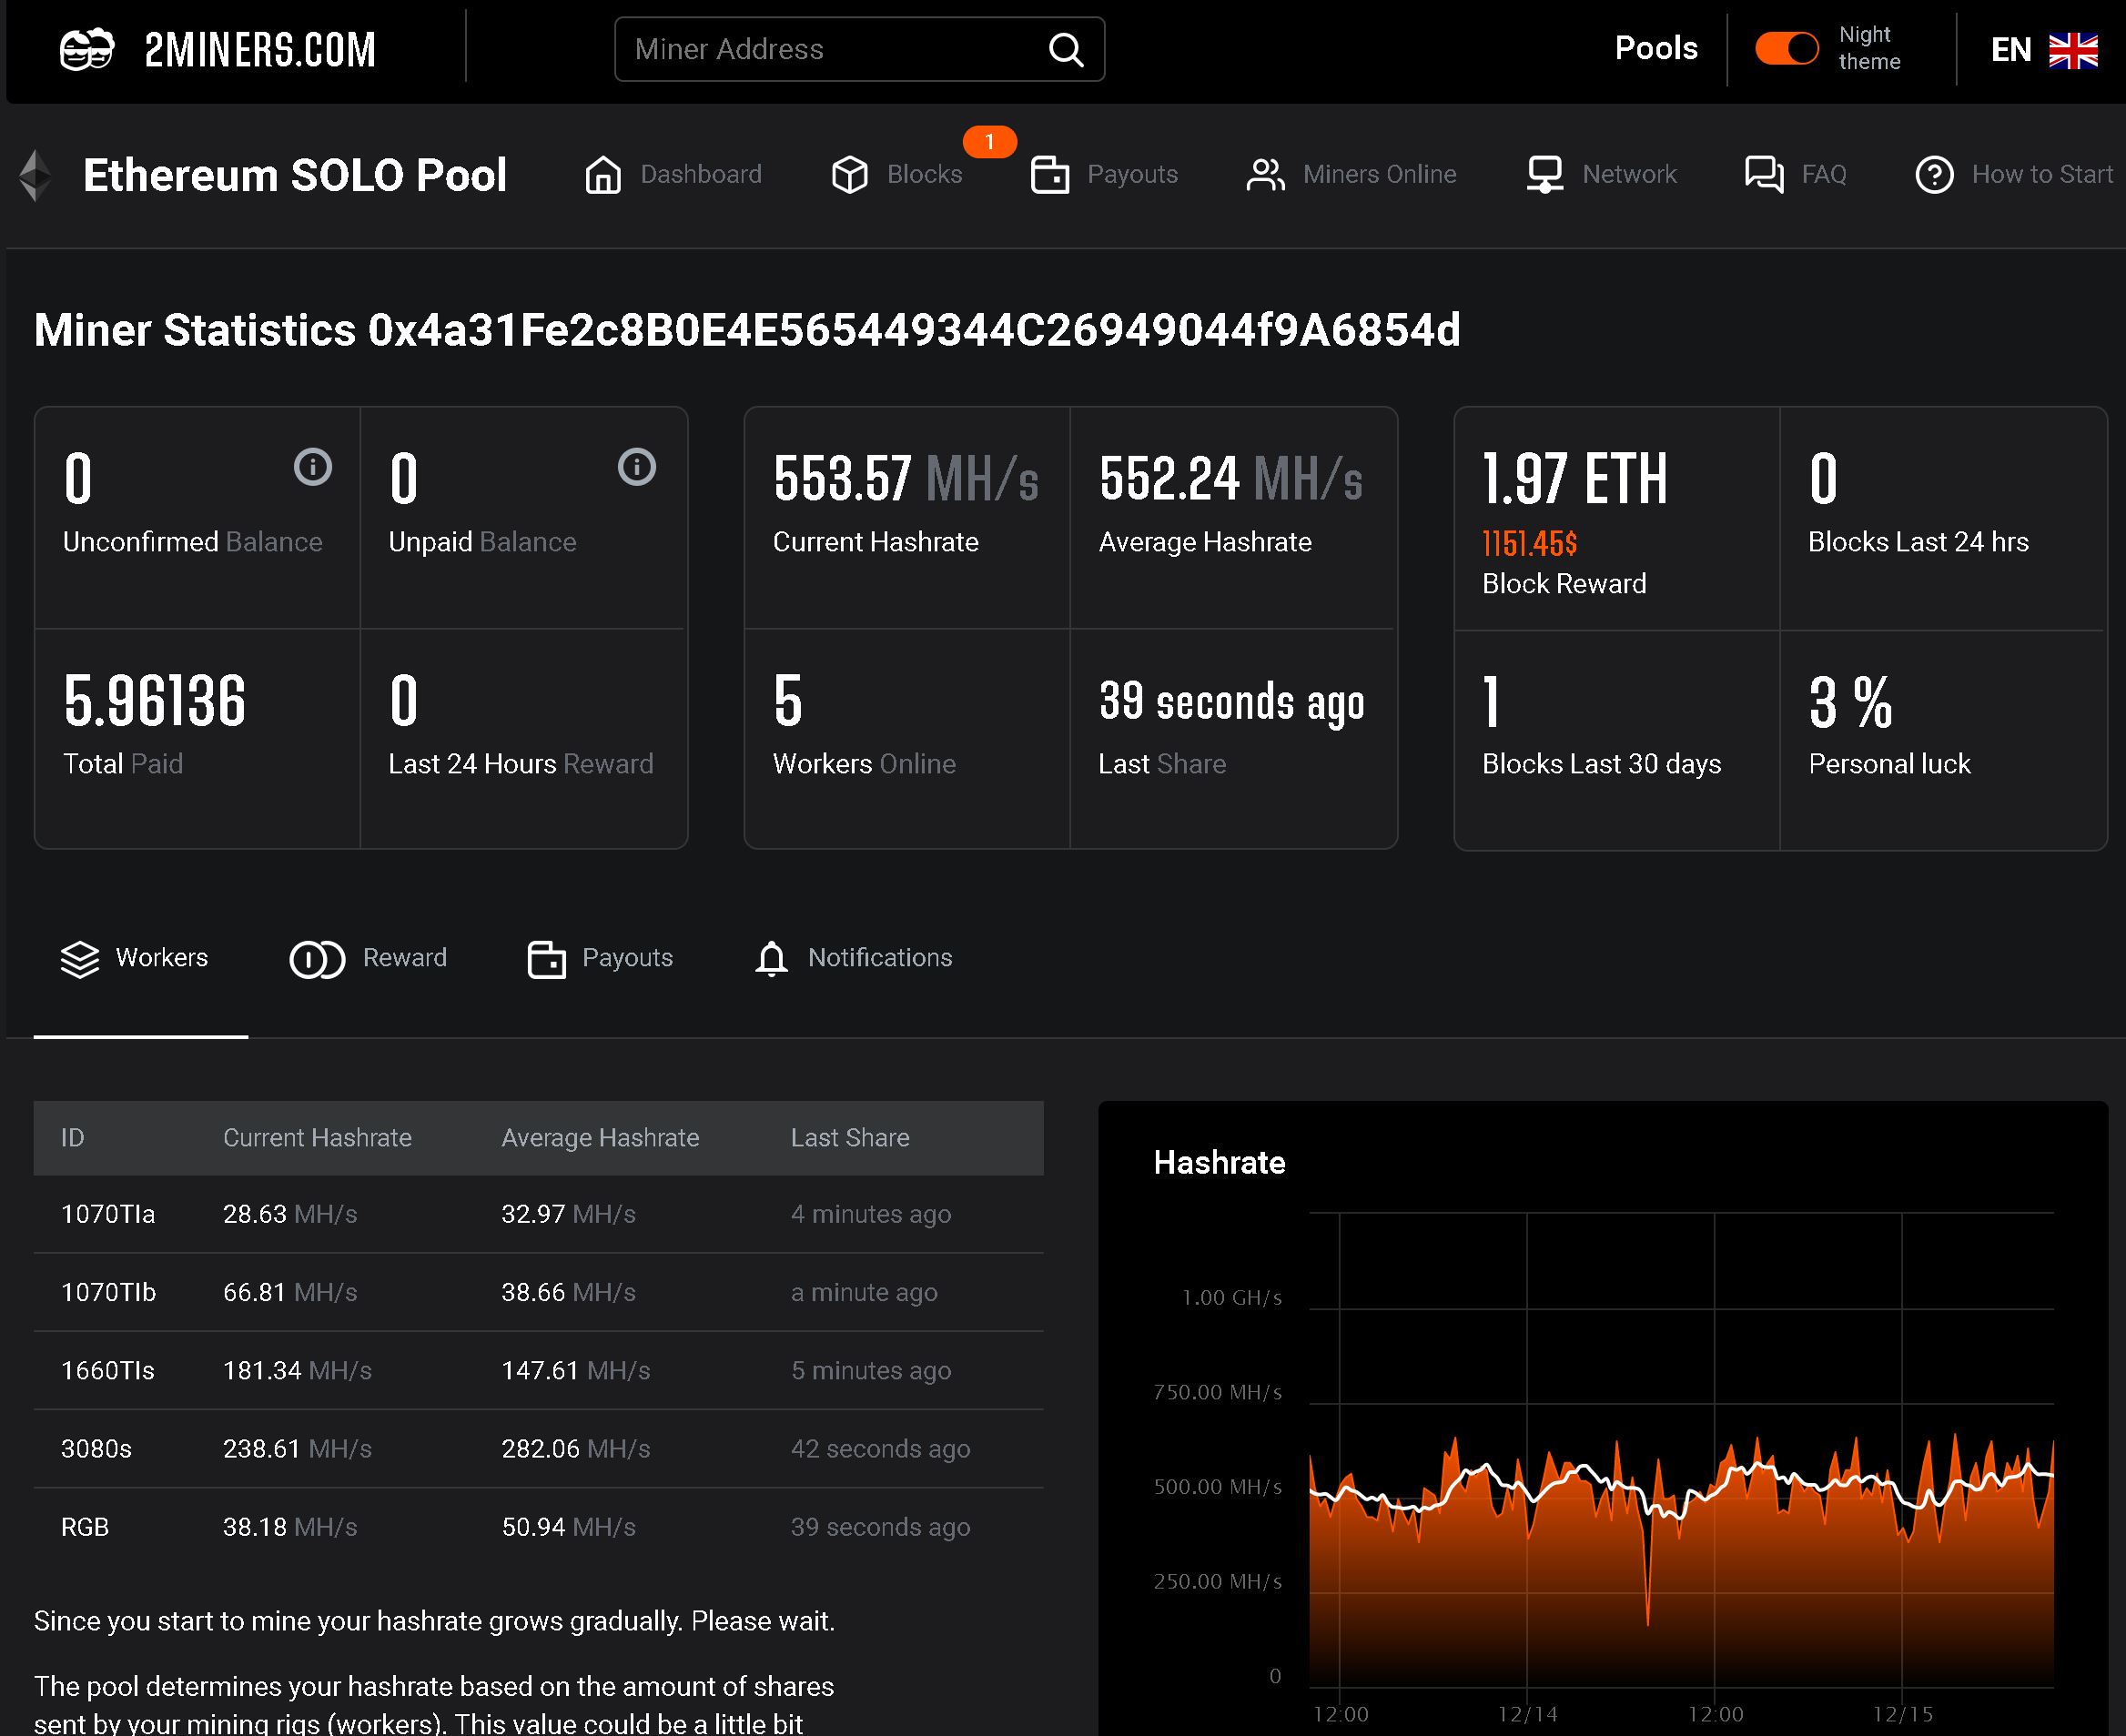 ethereum account not found on nanopool after hours of mining